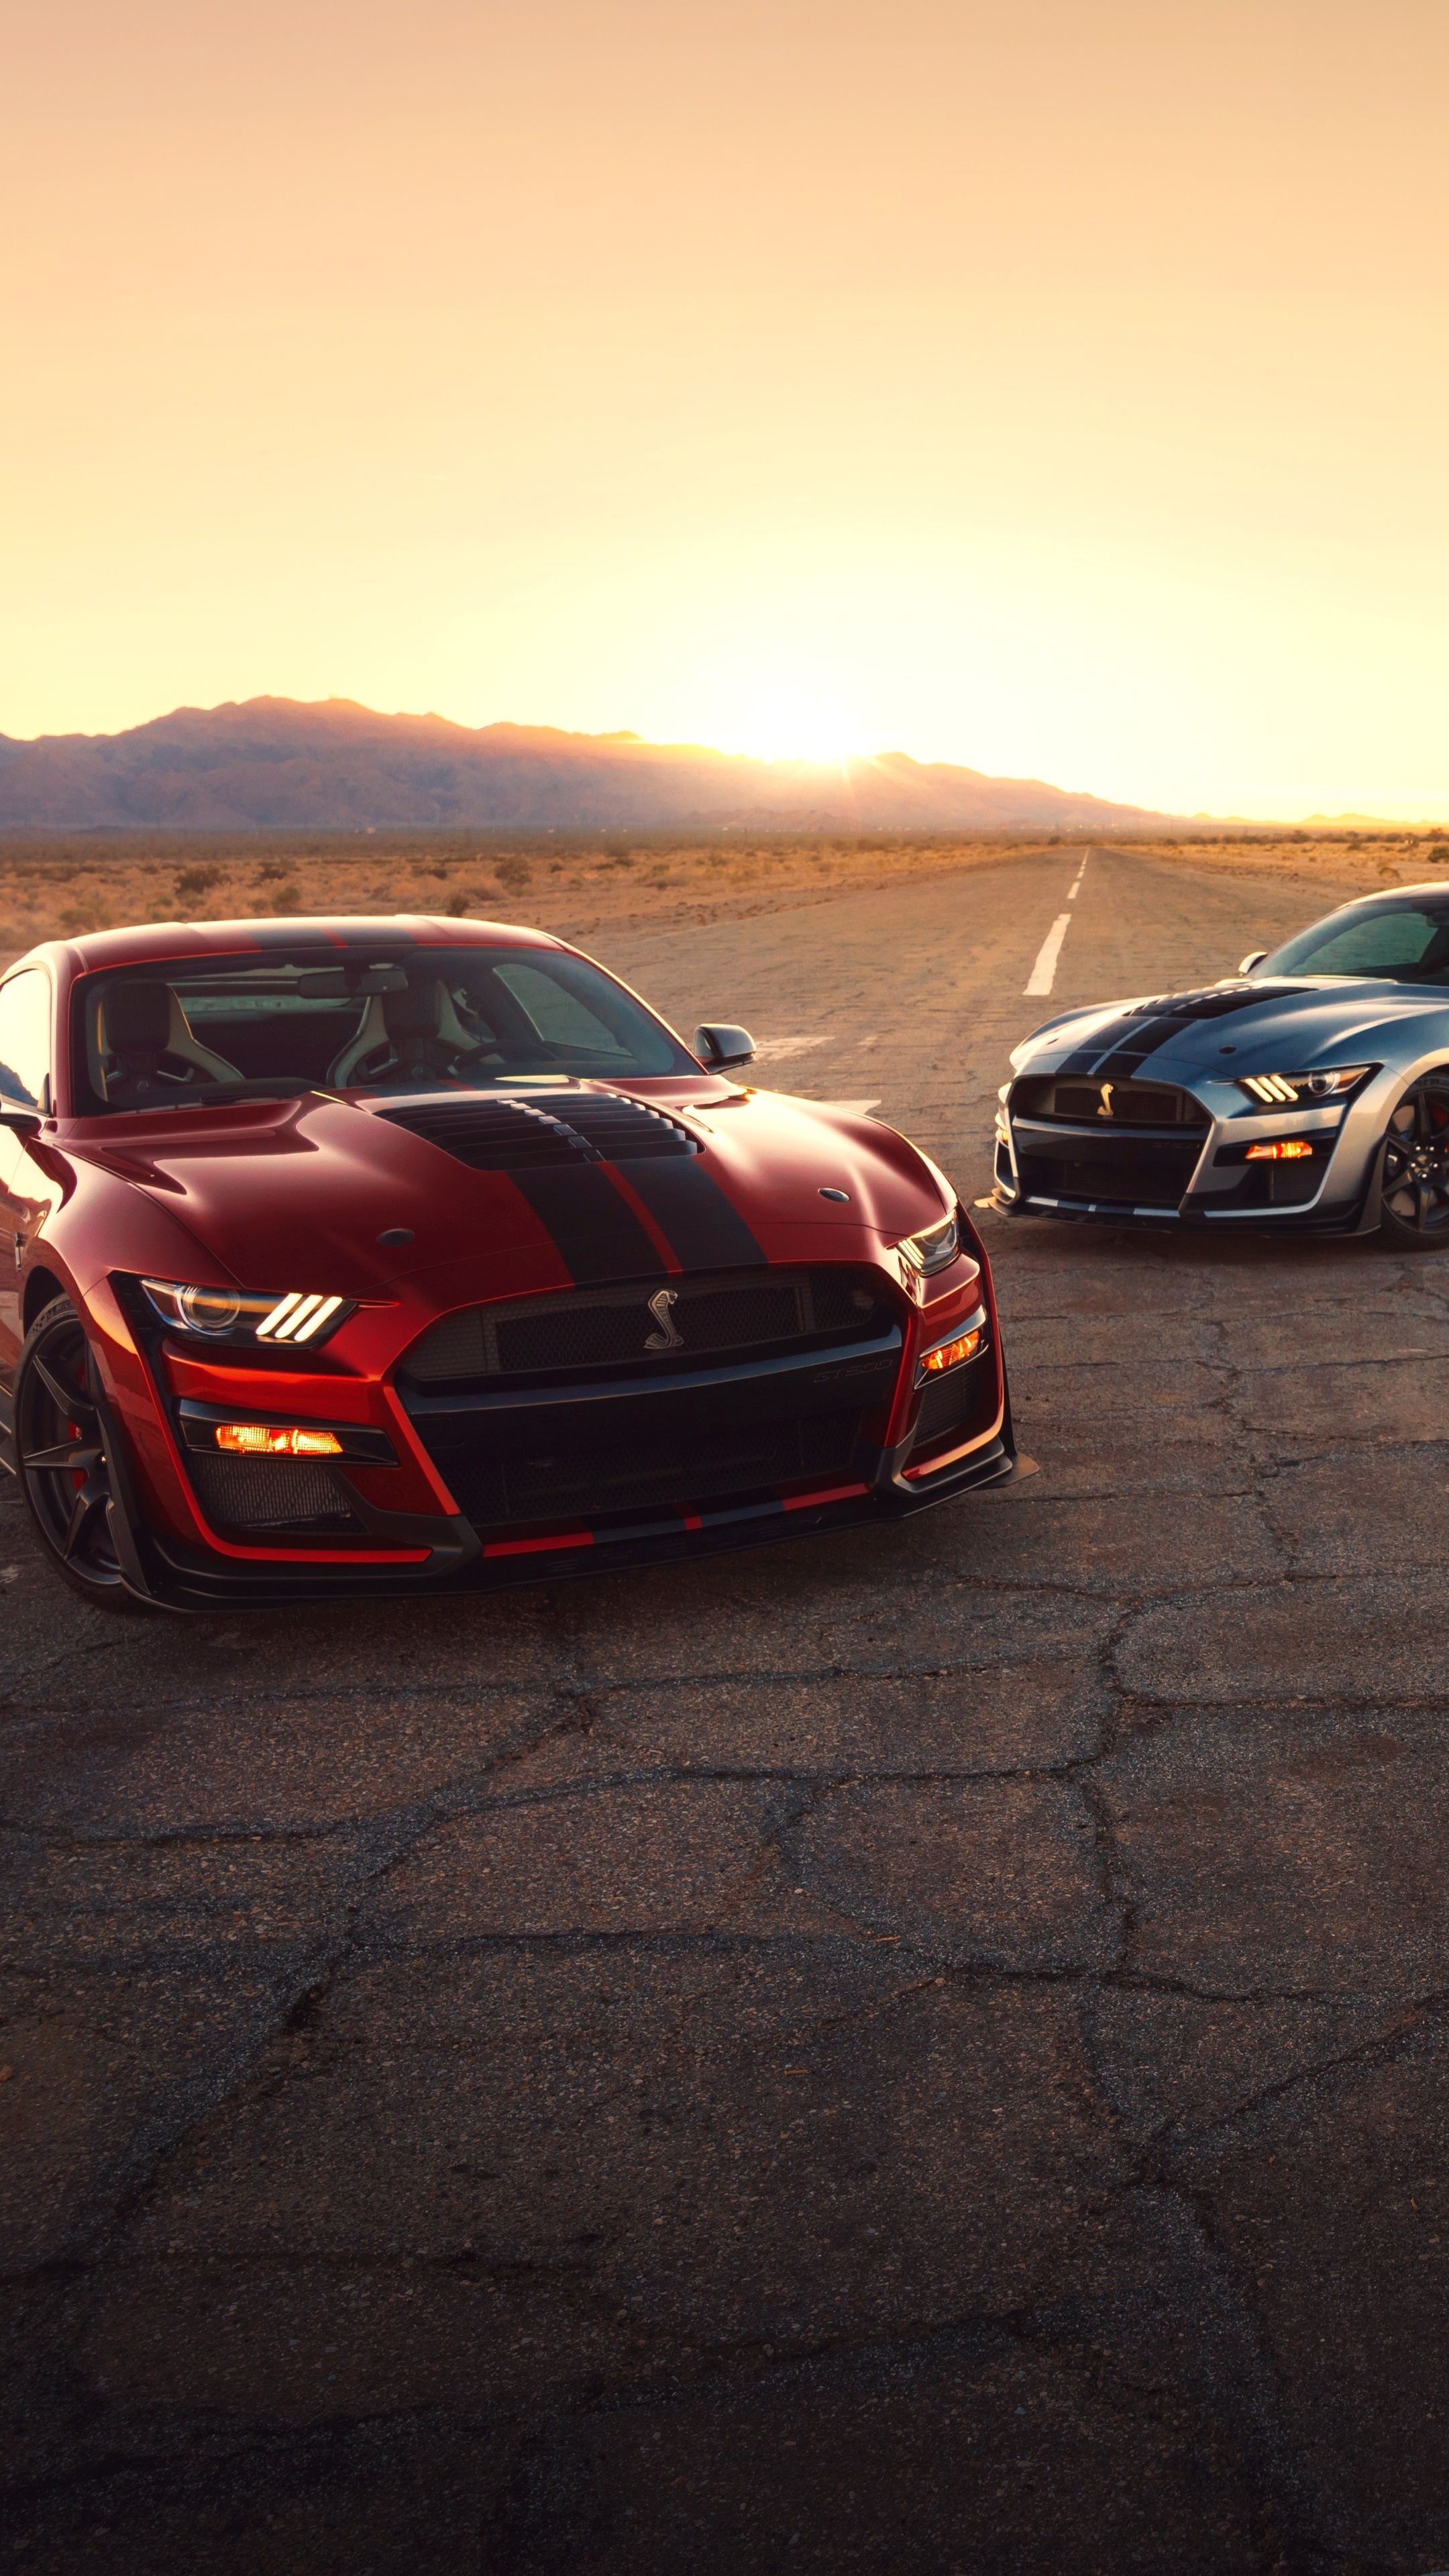 GT500 Auto, Ford Mustang Shelby GT500, Xperia wallpaper, 2160x3840 4K Phone